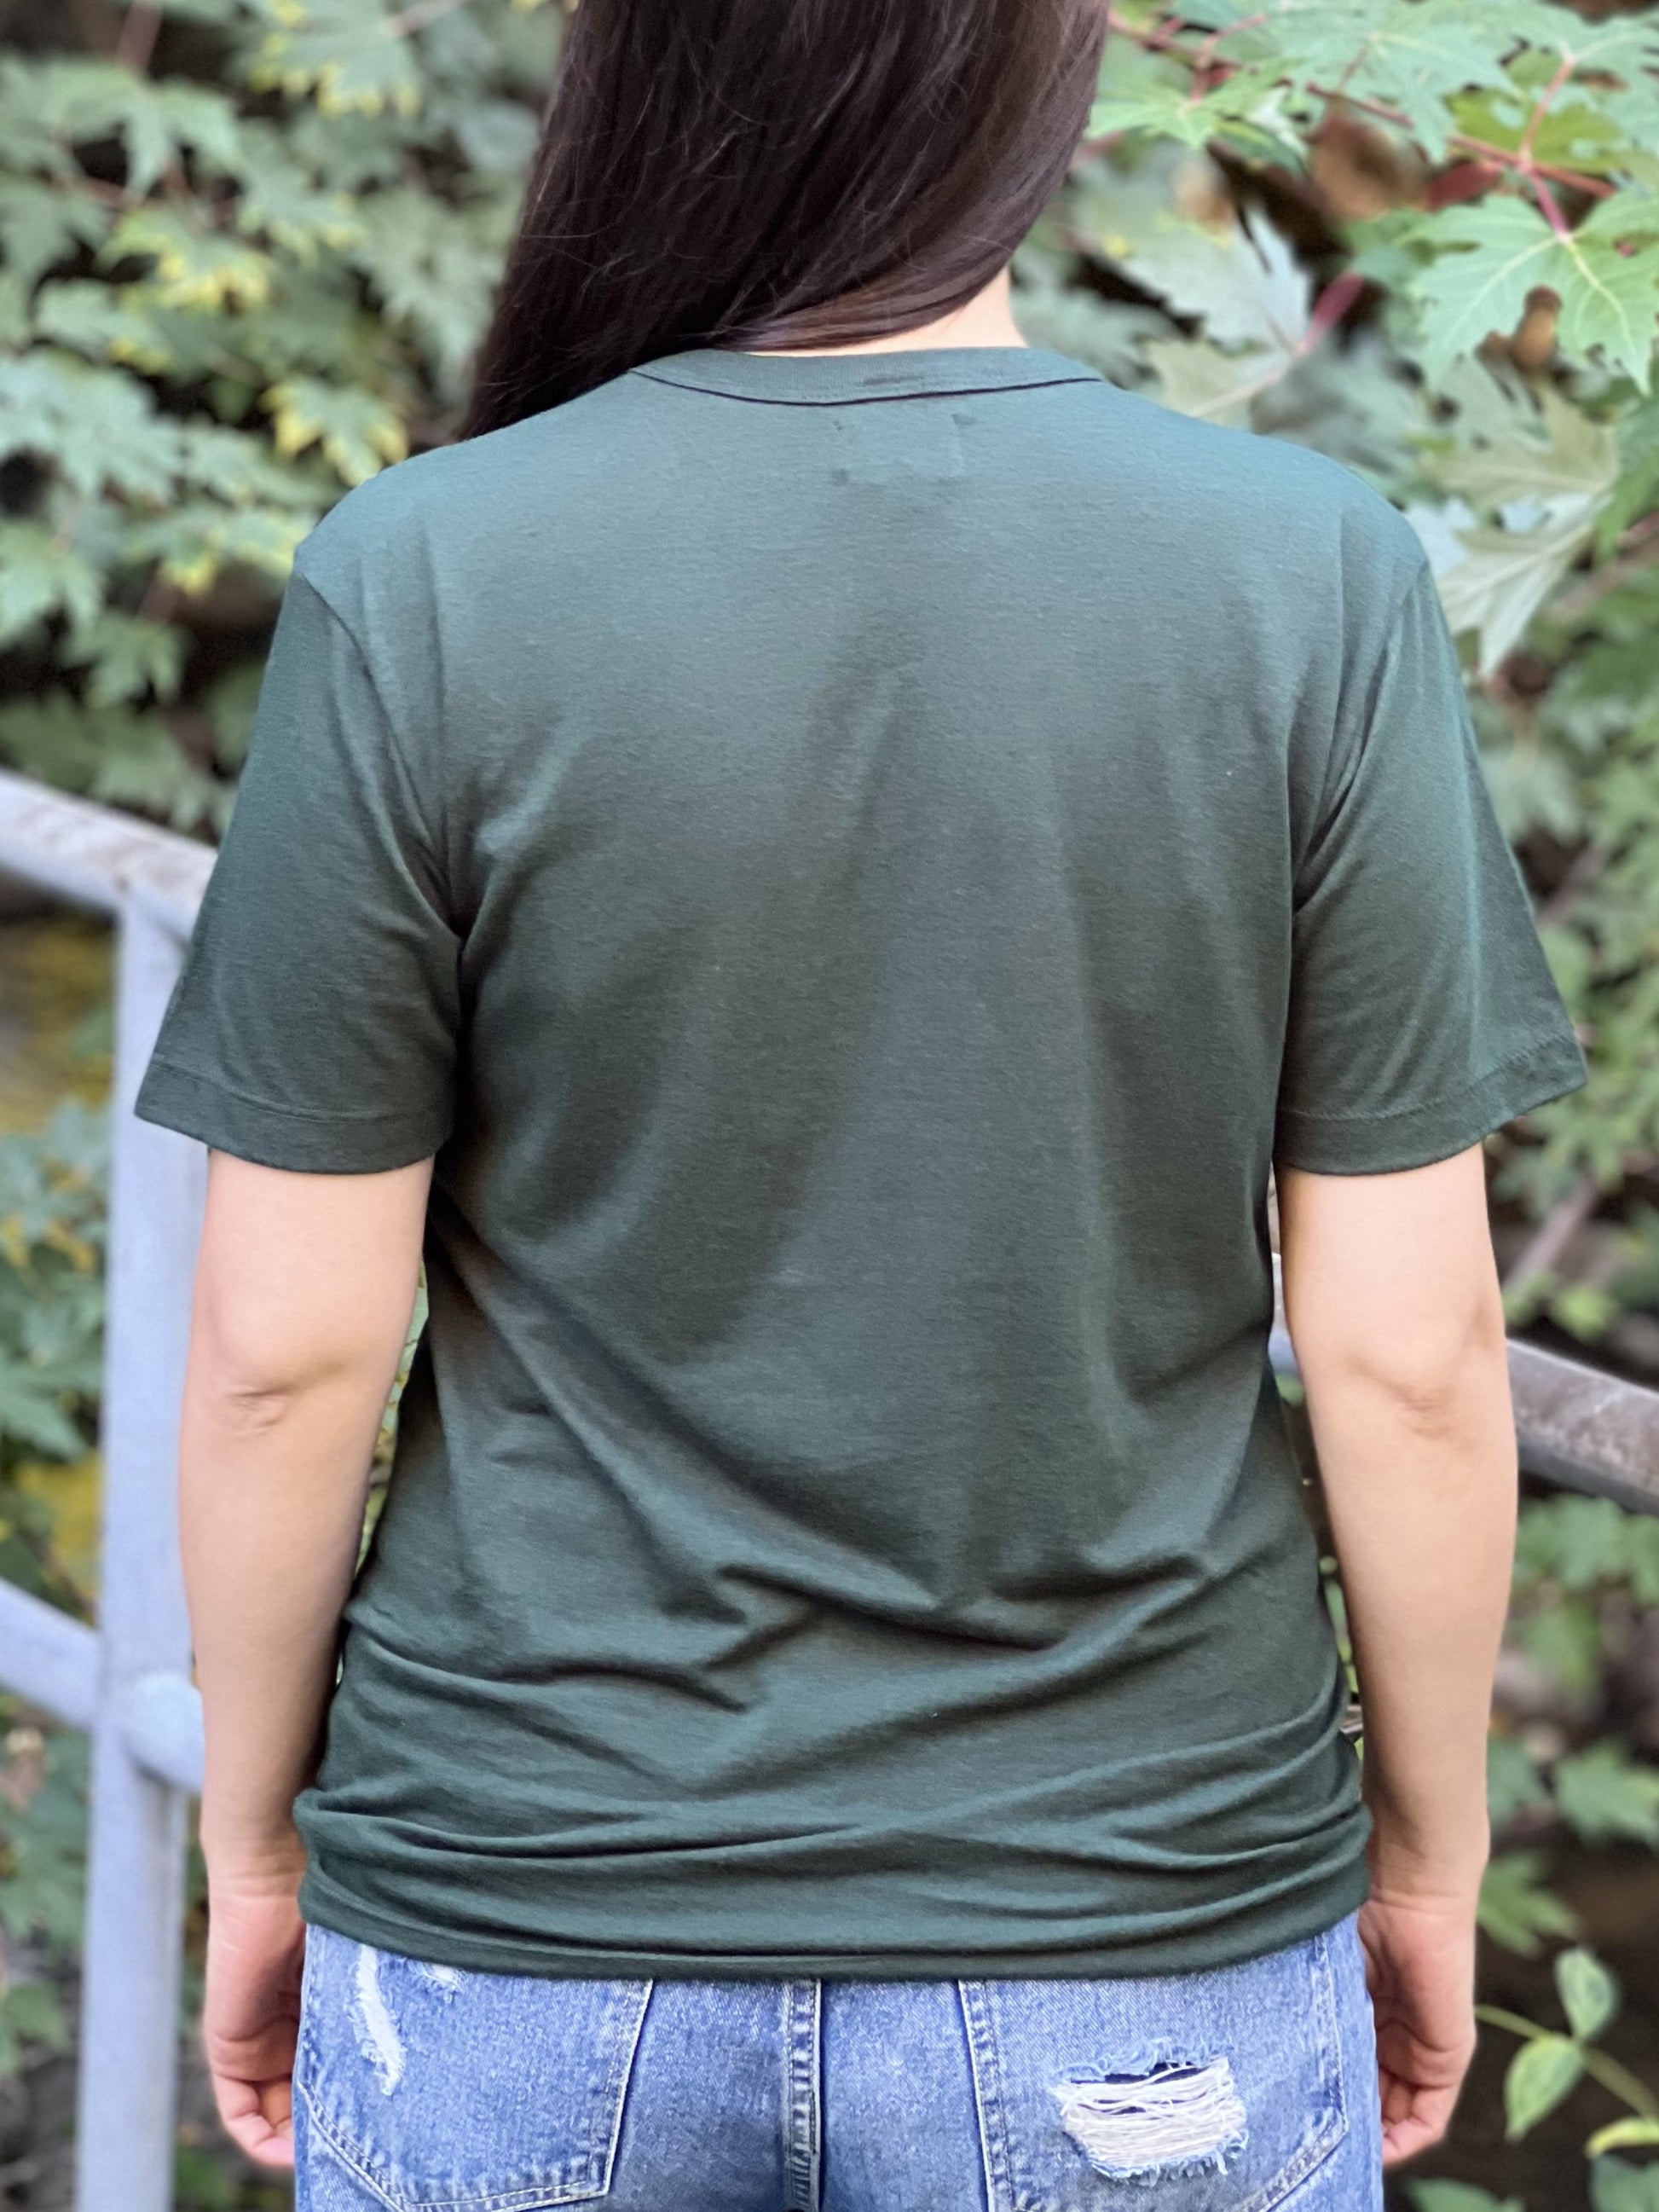 Back view of a woman wearing a forest green t-shirt